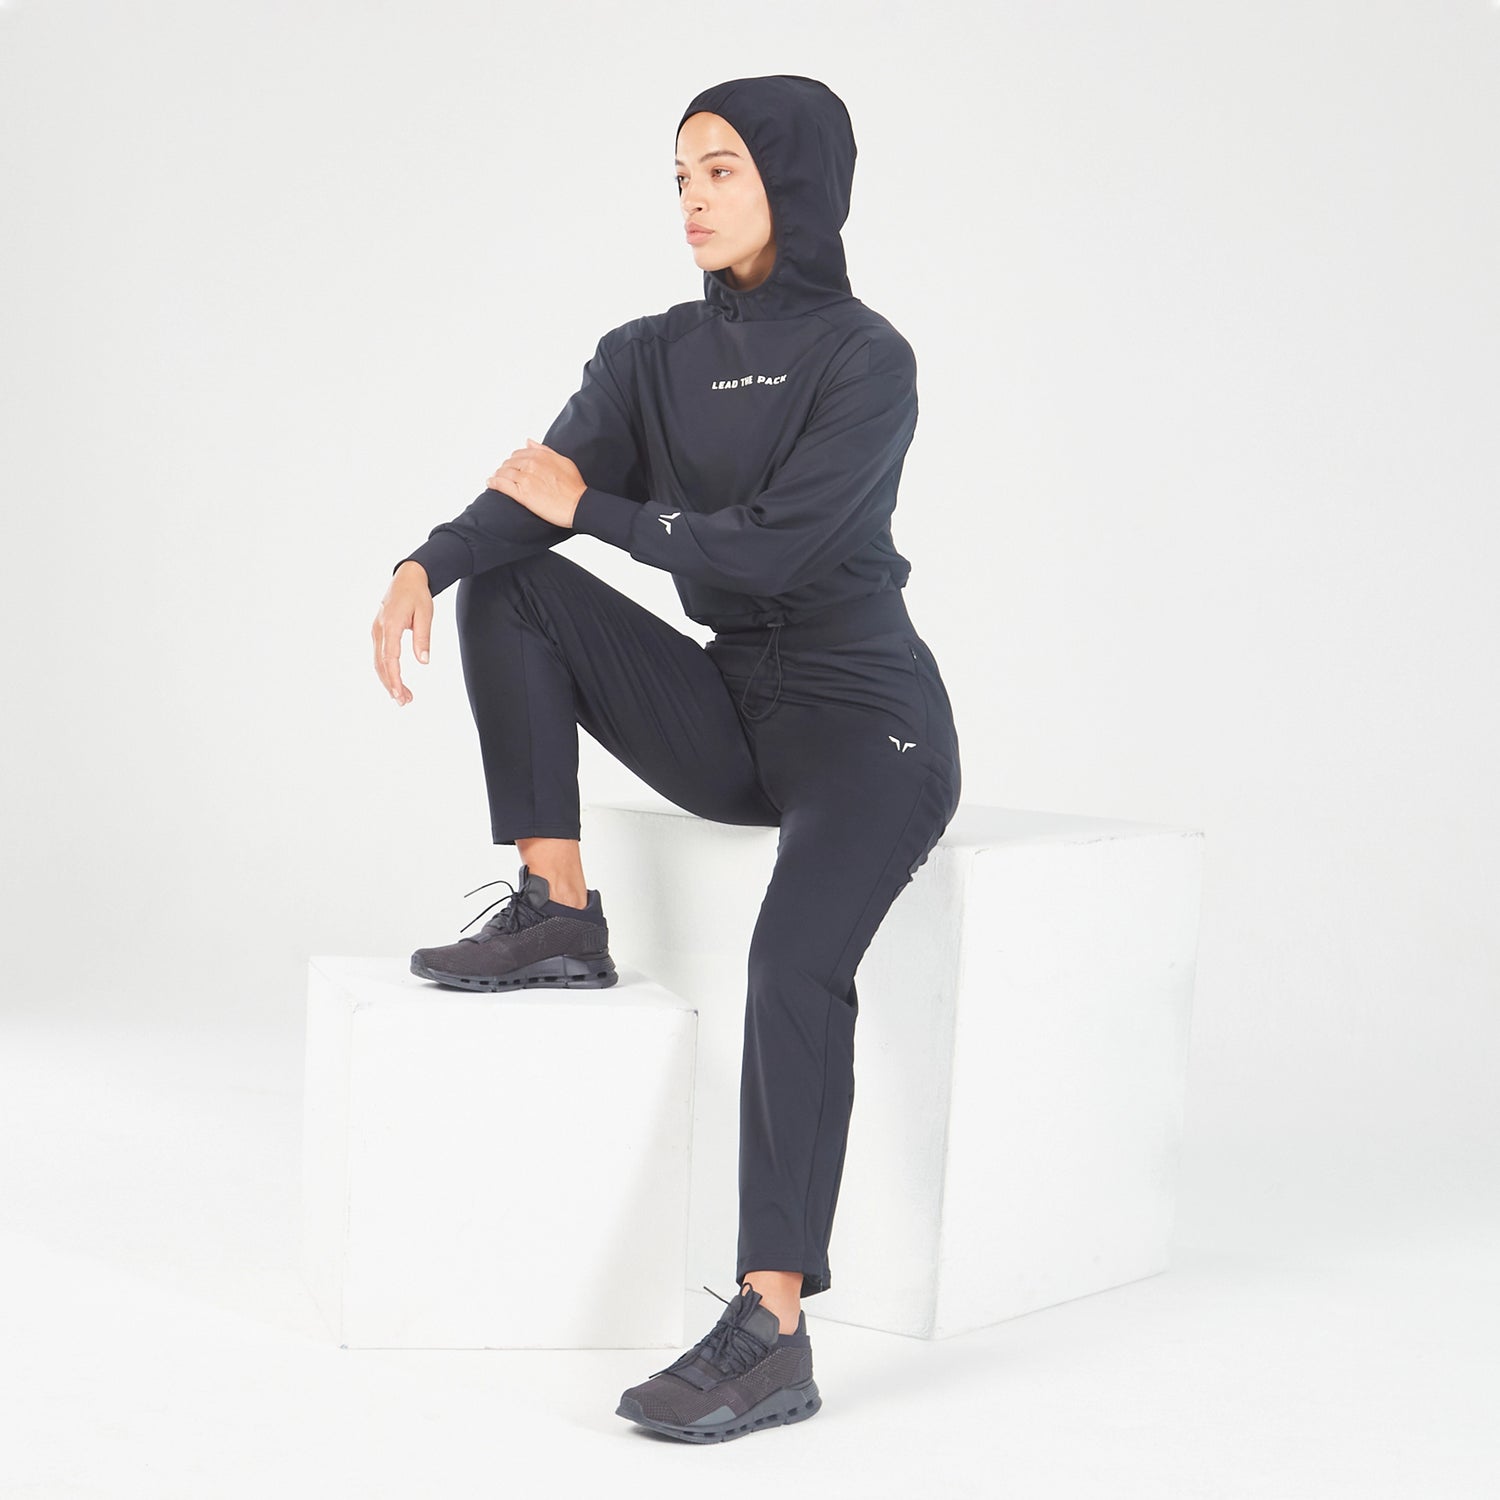 squatwolf-workout-clothes-core-velocity-hoodie-black-gym-hoodies-women